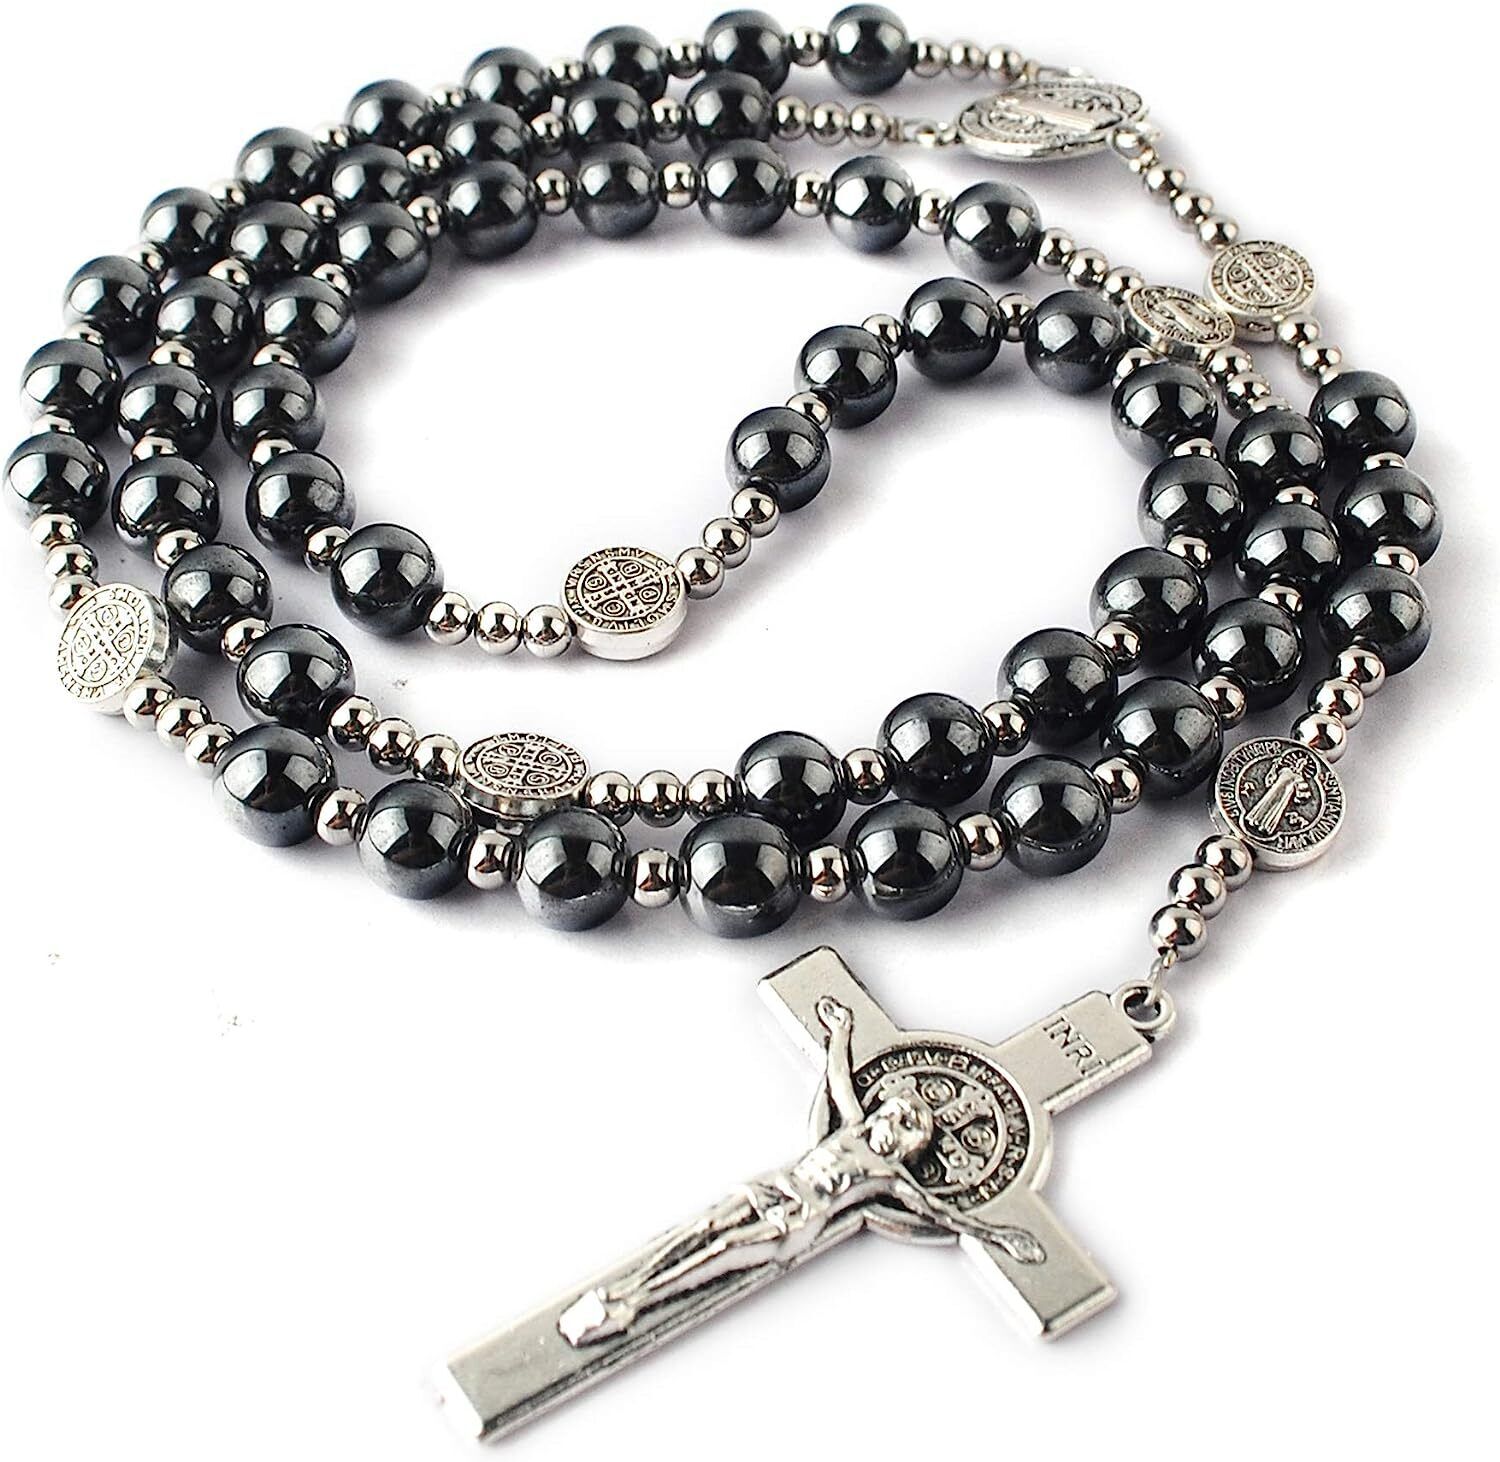 8mm Hematite Rosary Black Stone Beads with 4mm Stainless Steel Beads